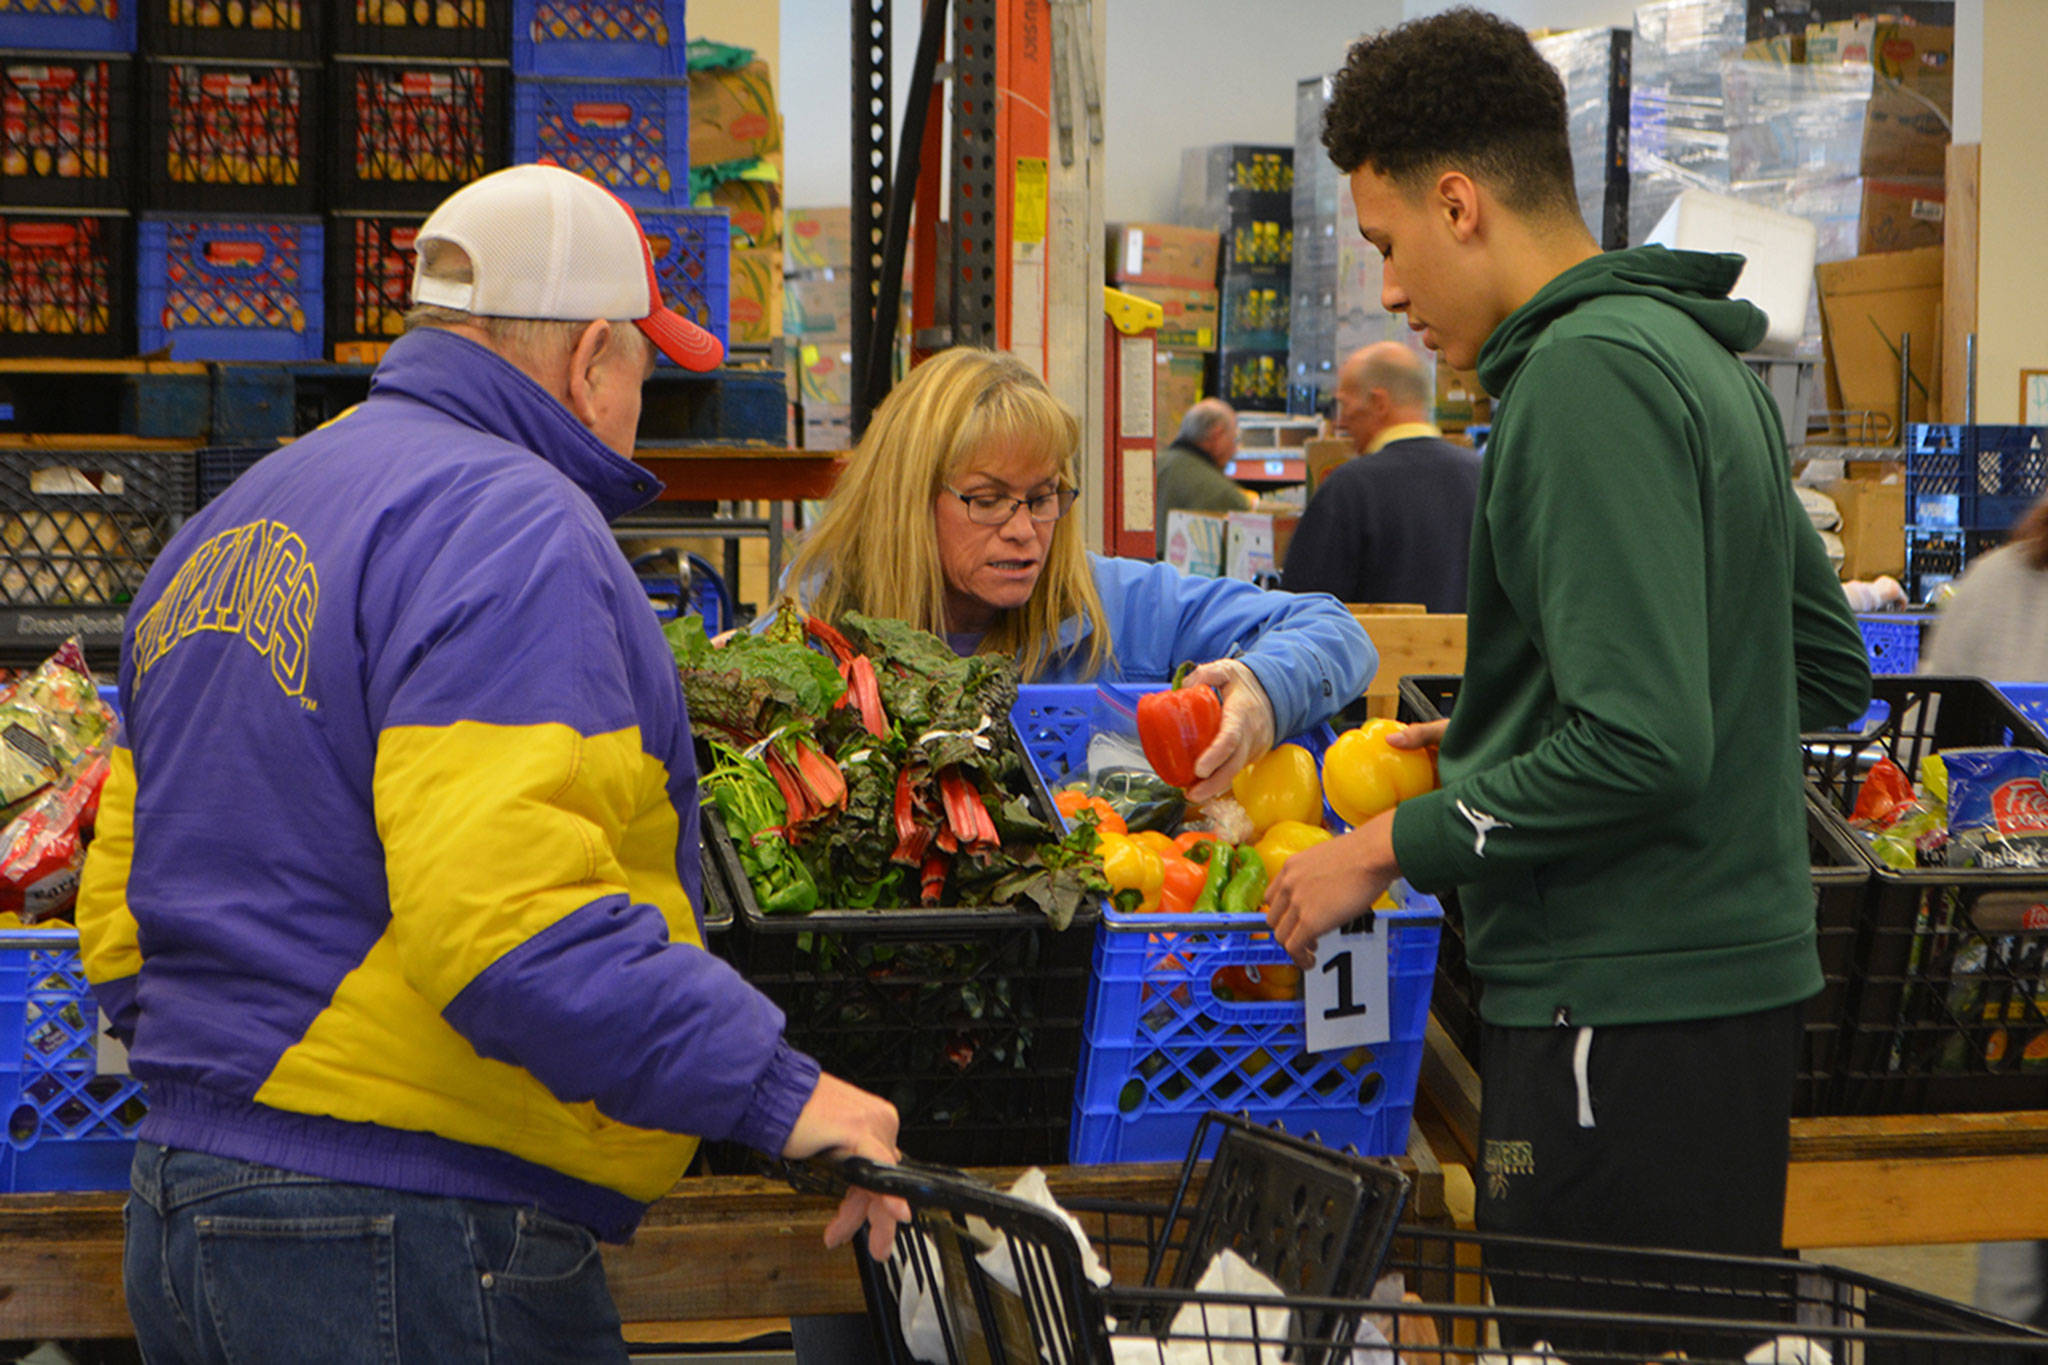 Helping people in need at food bank helps MG basketball players appreciate what they have